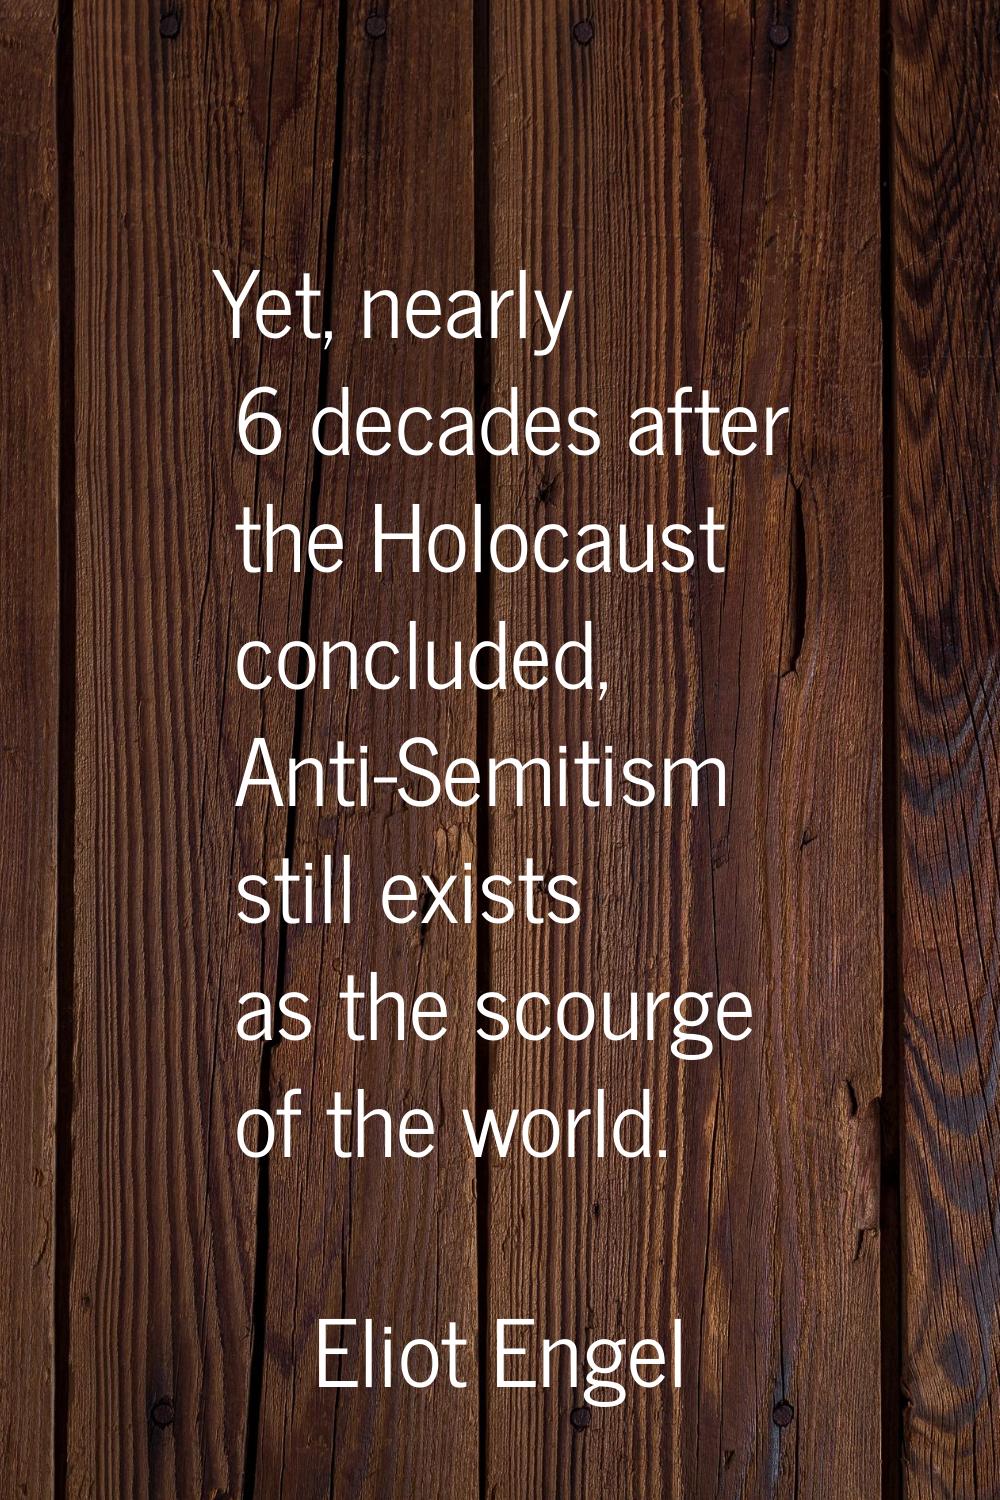 Yet, nearly 6 decades after the Holocaust concluded, Anti-Semitism still exists as the scourge of t